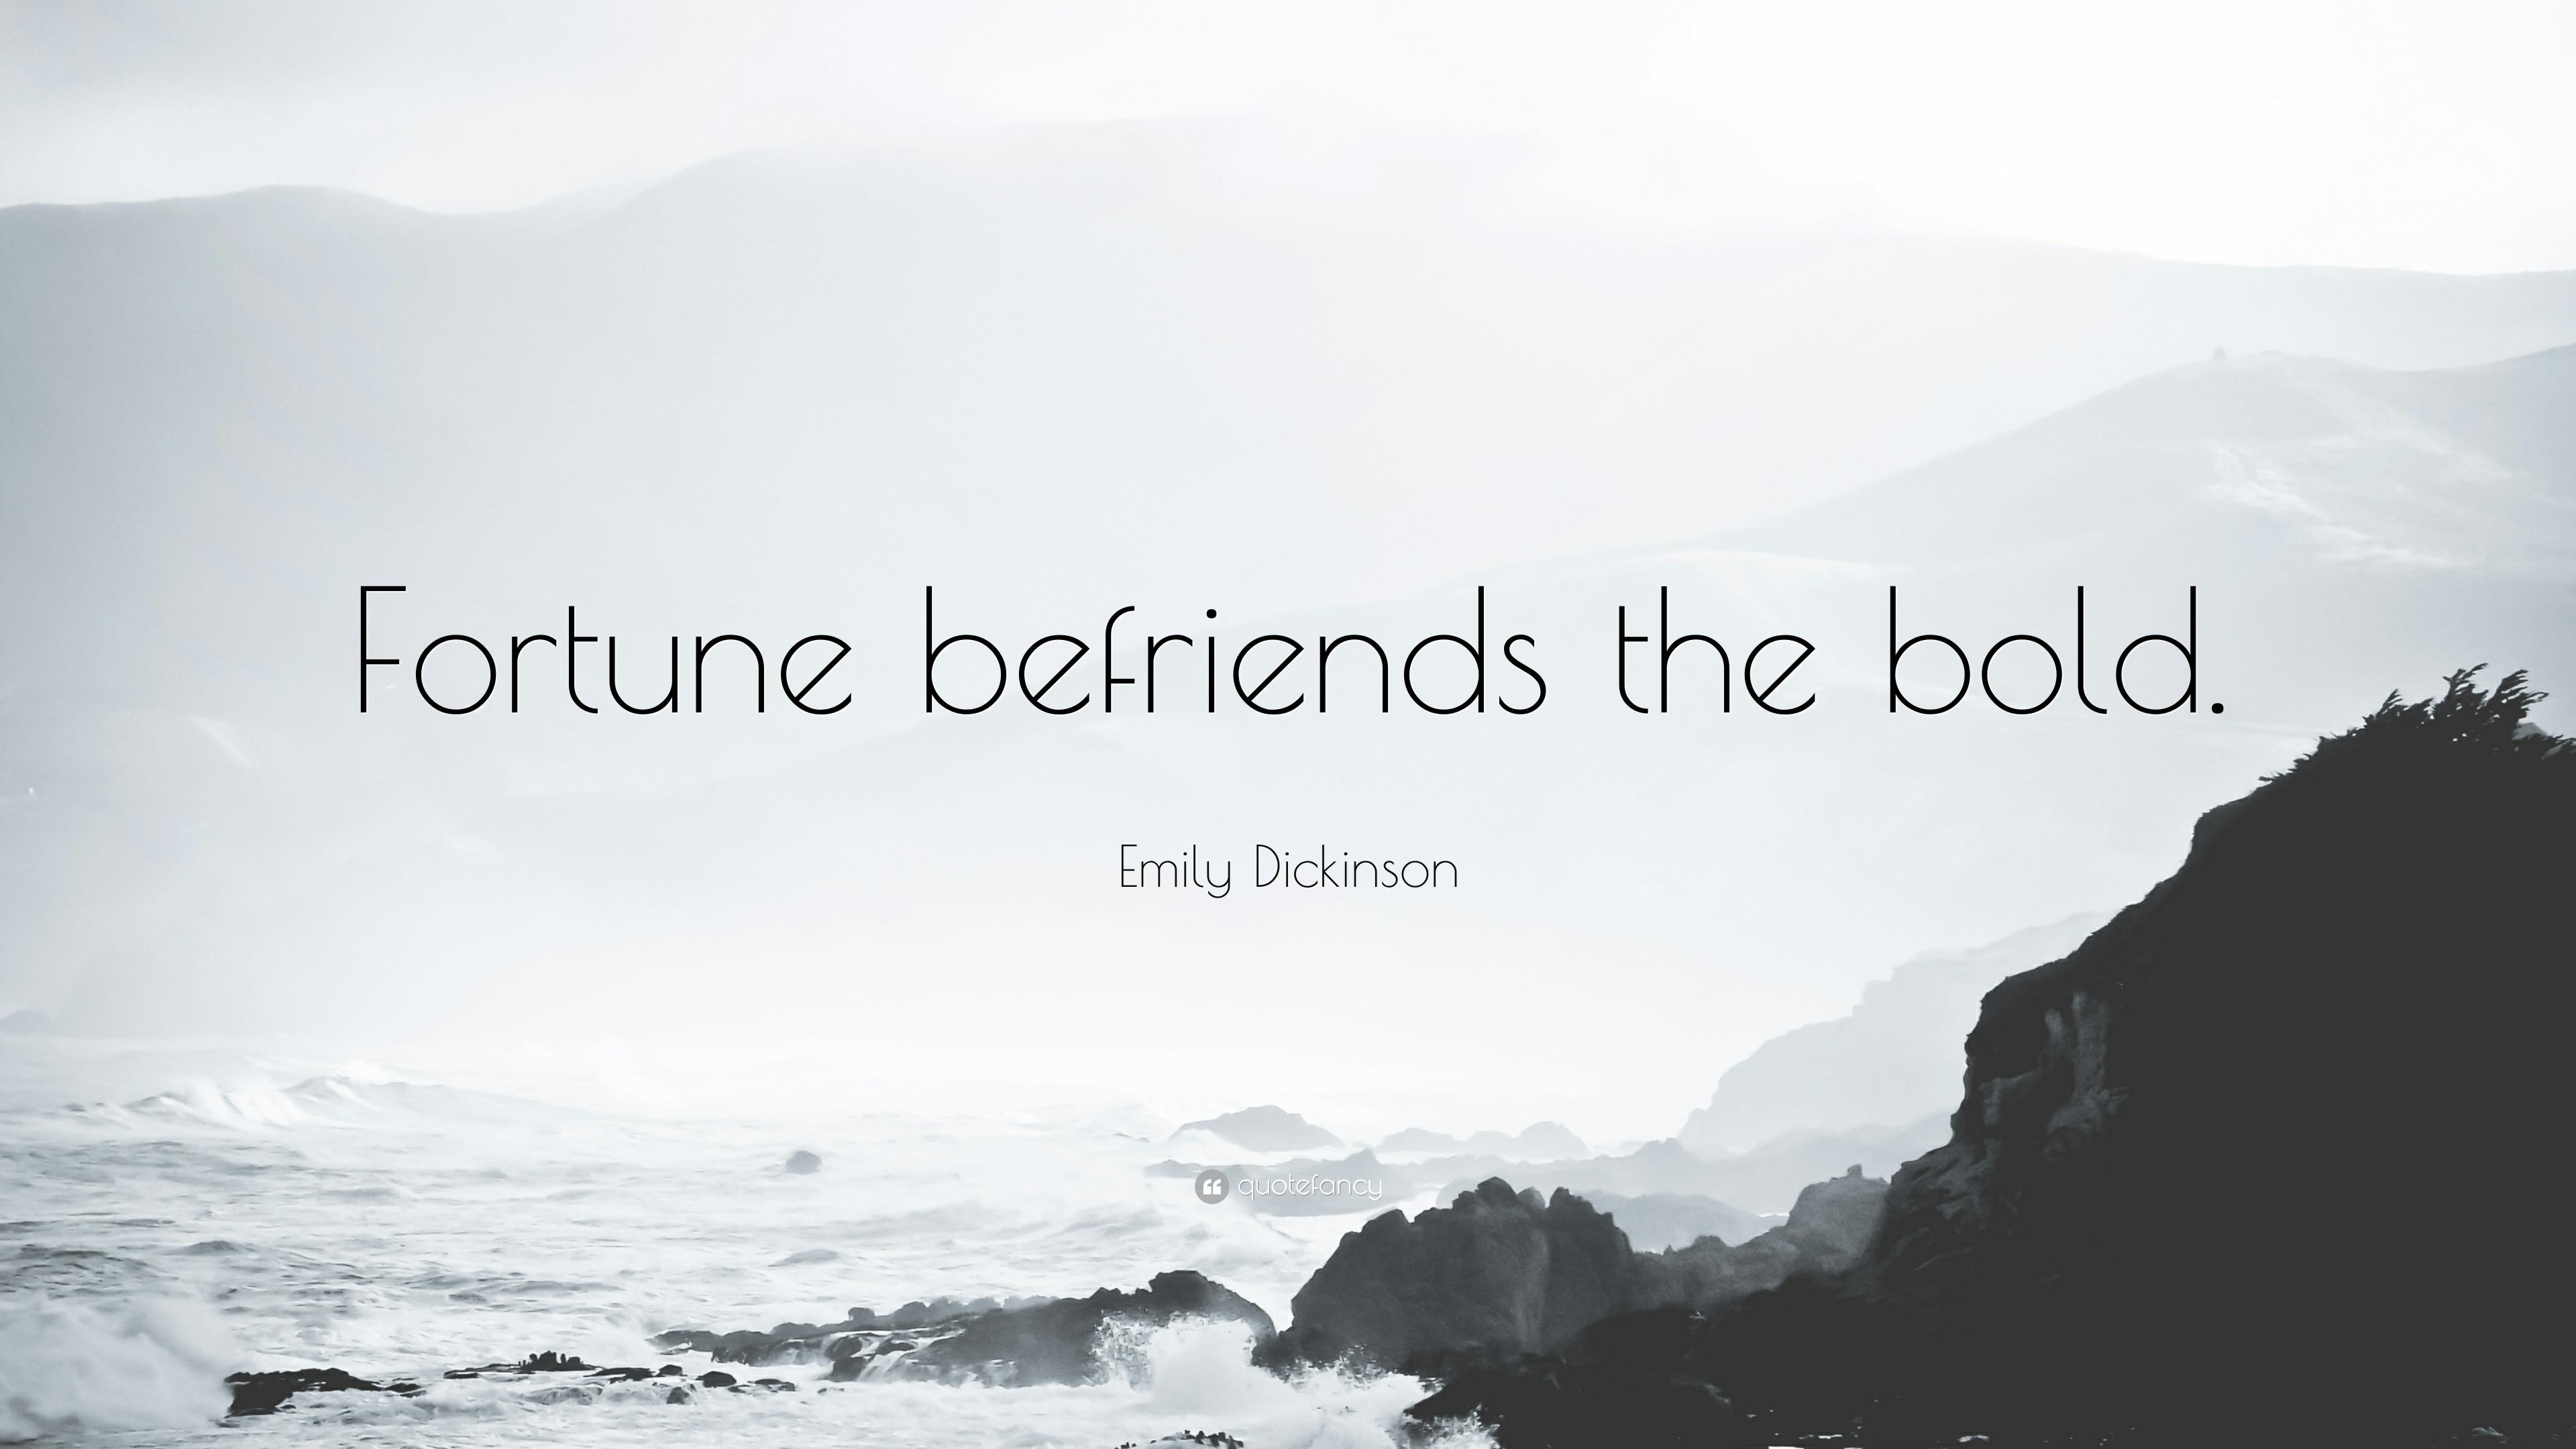 Emily Dickinson Quote: “Fortune befriends the bold.” 12 wallpaper